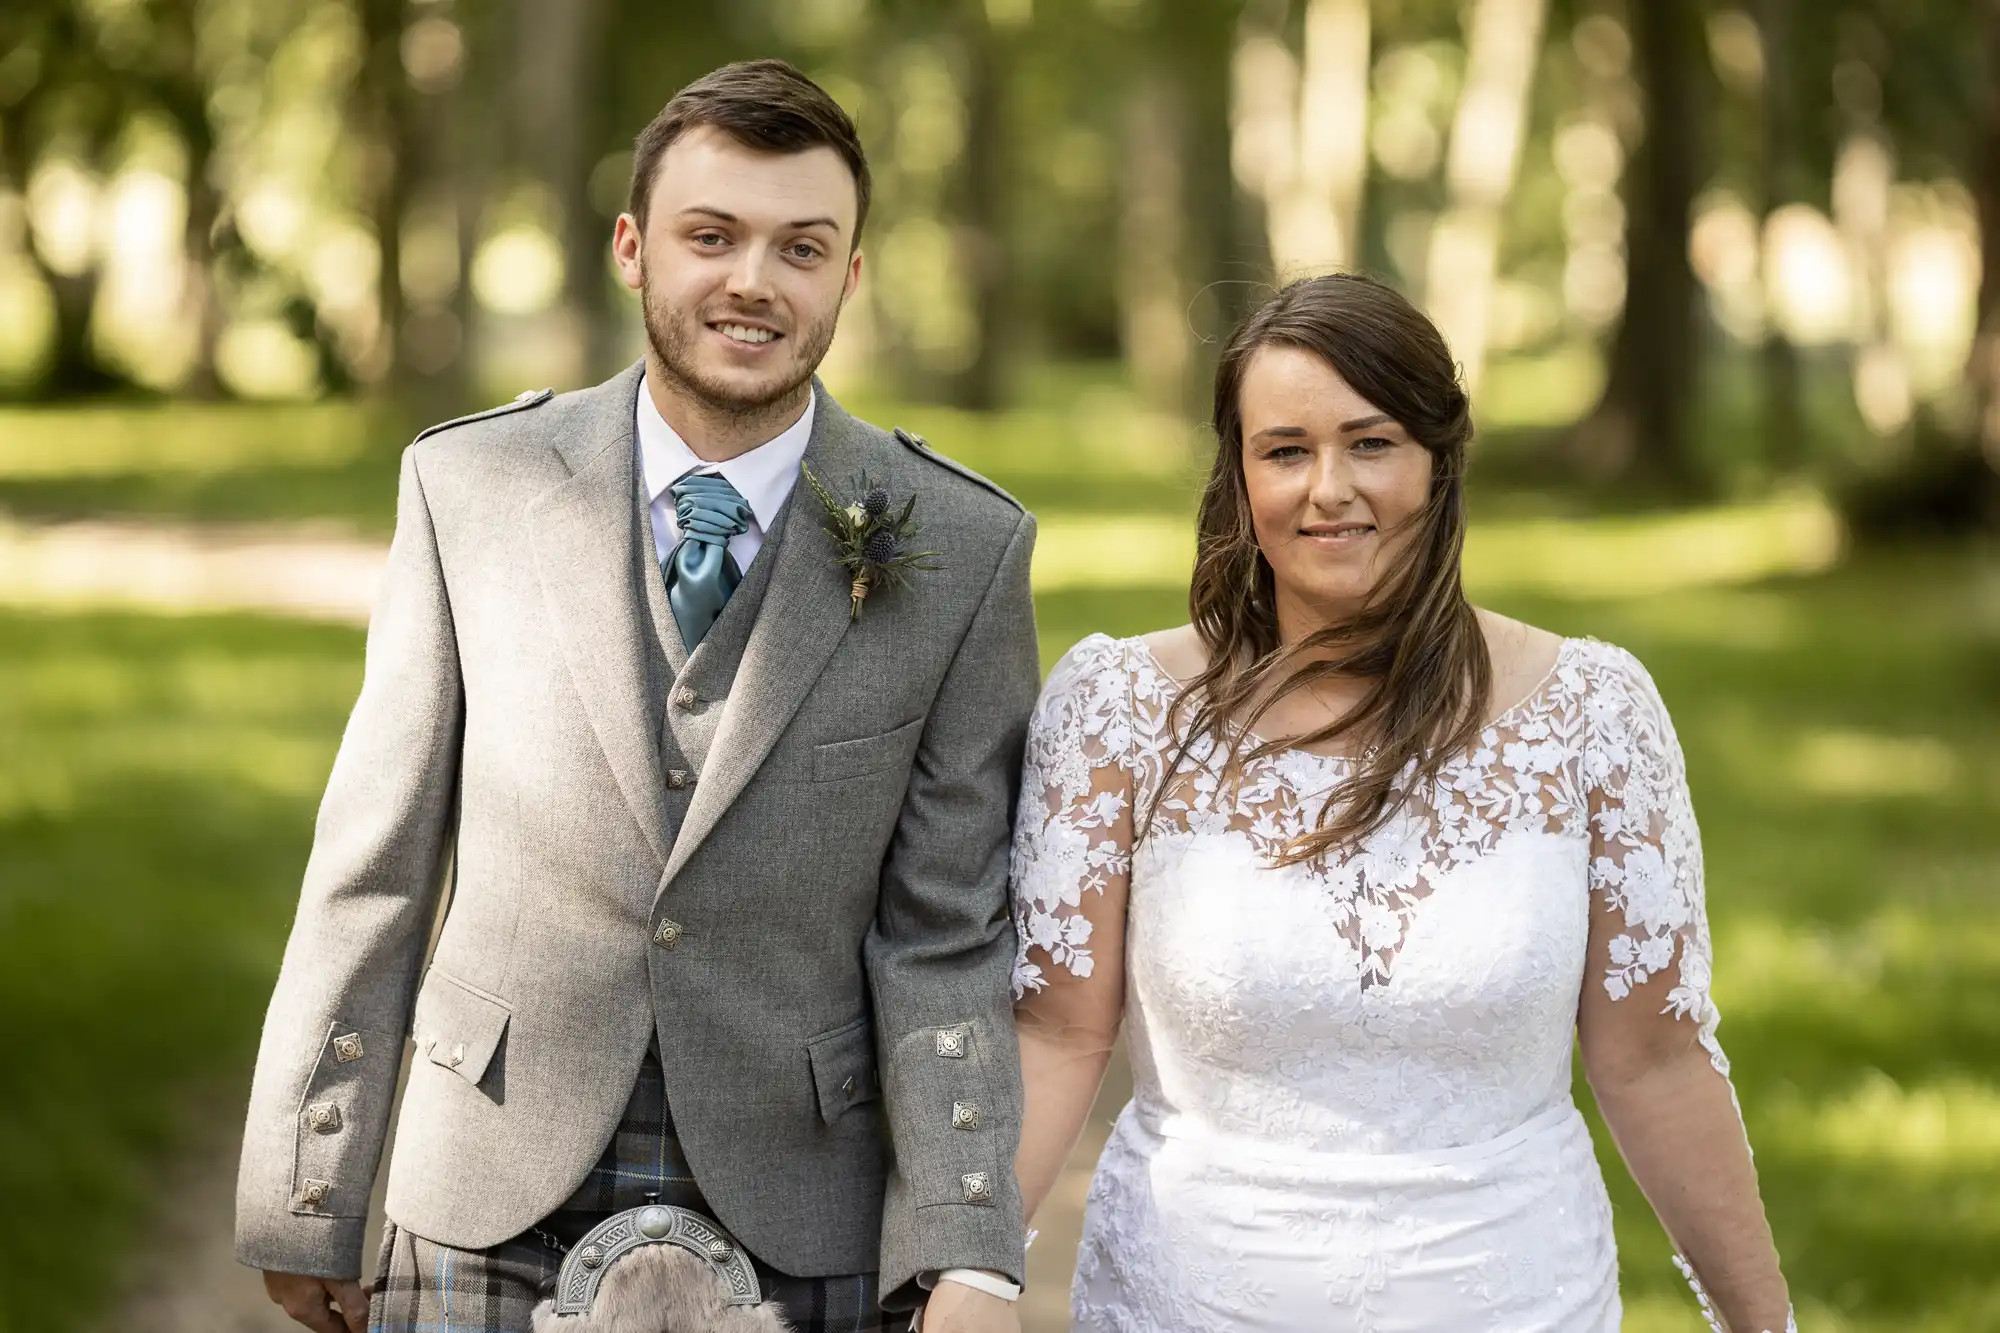 A bride and groom in formal attire smiling outdoors, with the groom wearing a kilt and the bride in a lace dress.